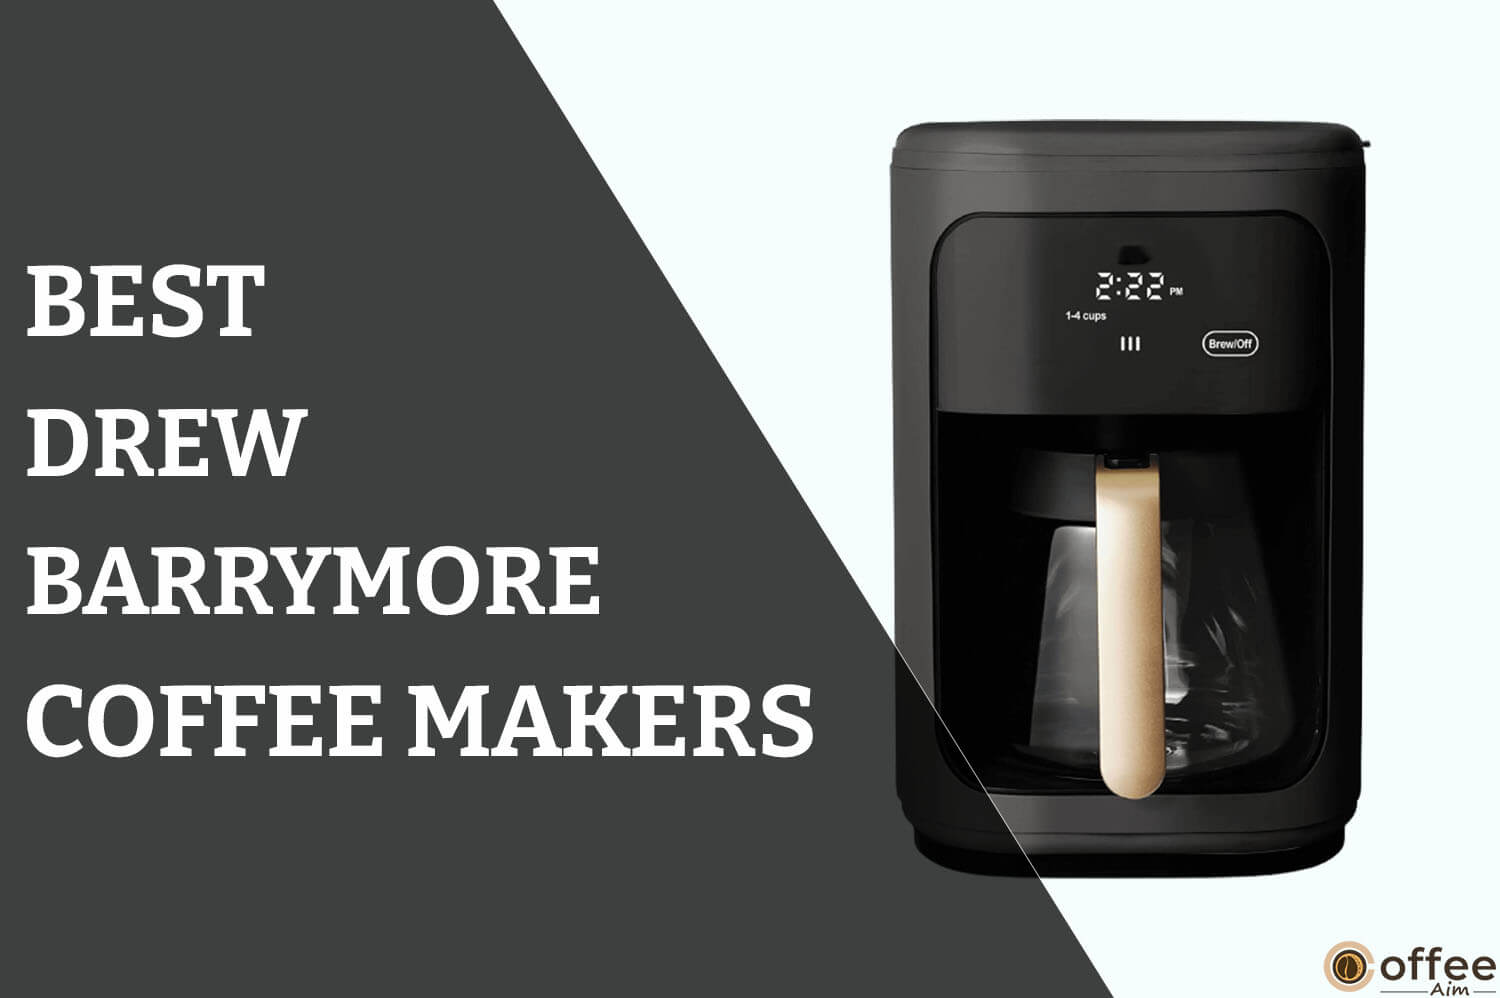 Feature image for an article "Best Drew Barrymore Coffee Maker Review"